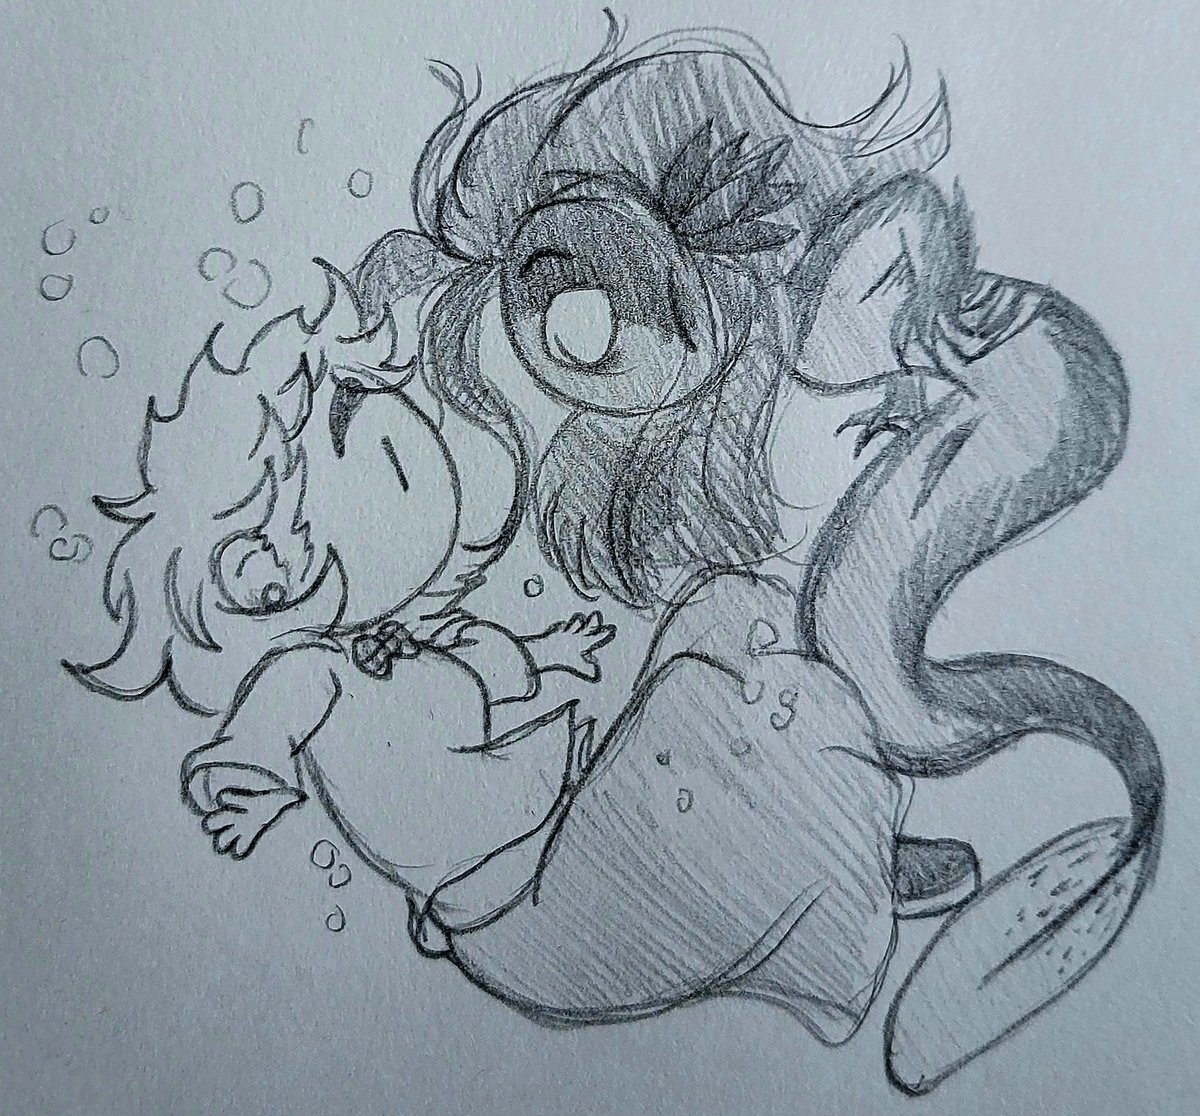 Ineffable Inktober day 17: fantasy au My Ineffable Wives sea monster au is perfect today! (Had a different idea in mind, but I'm not ready to reveal it yet) #GoodOmens